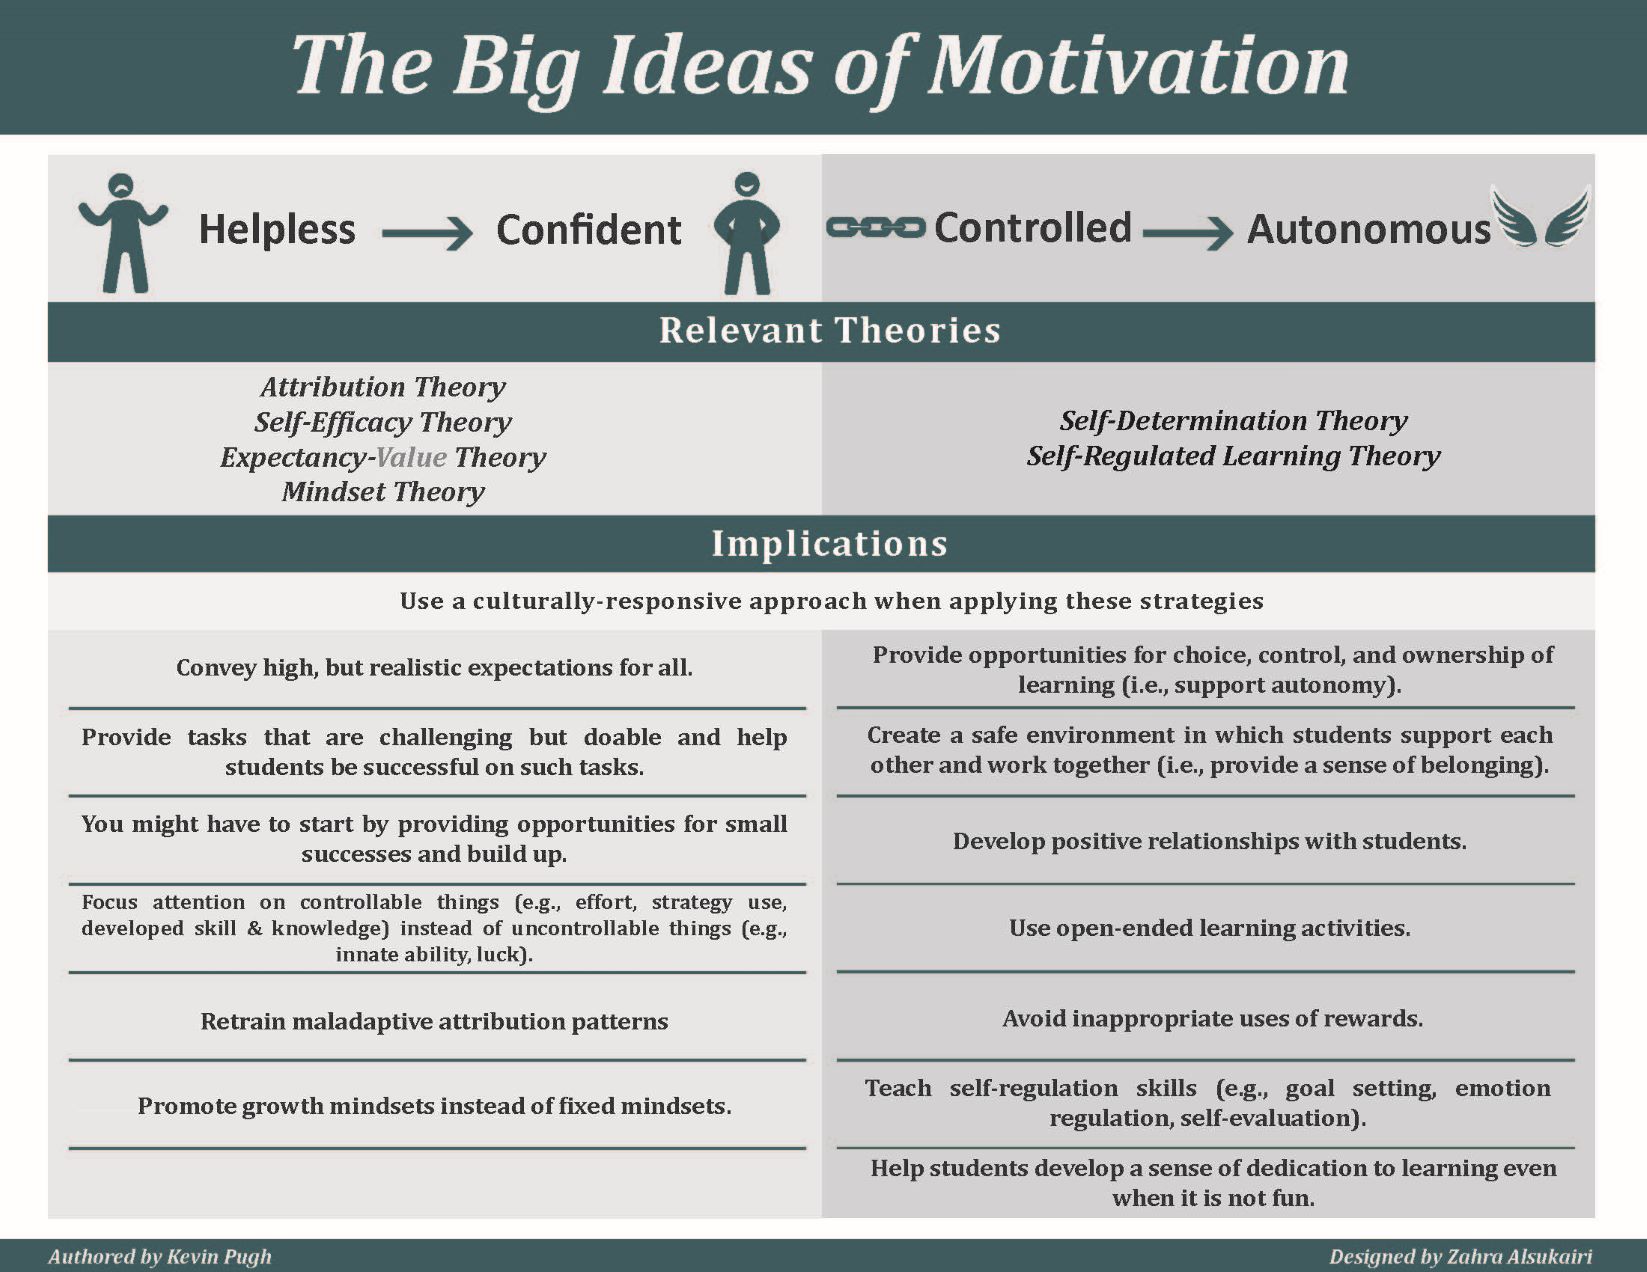 image discusses two big ideas for motivation